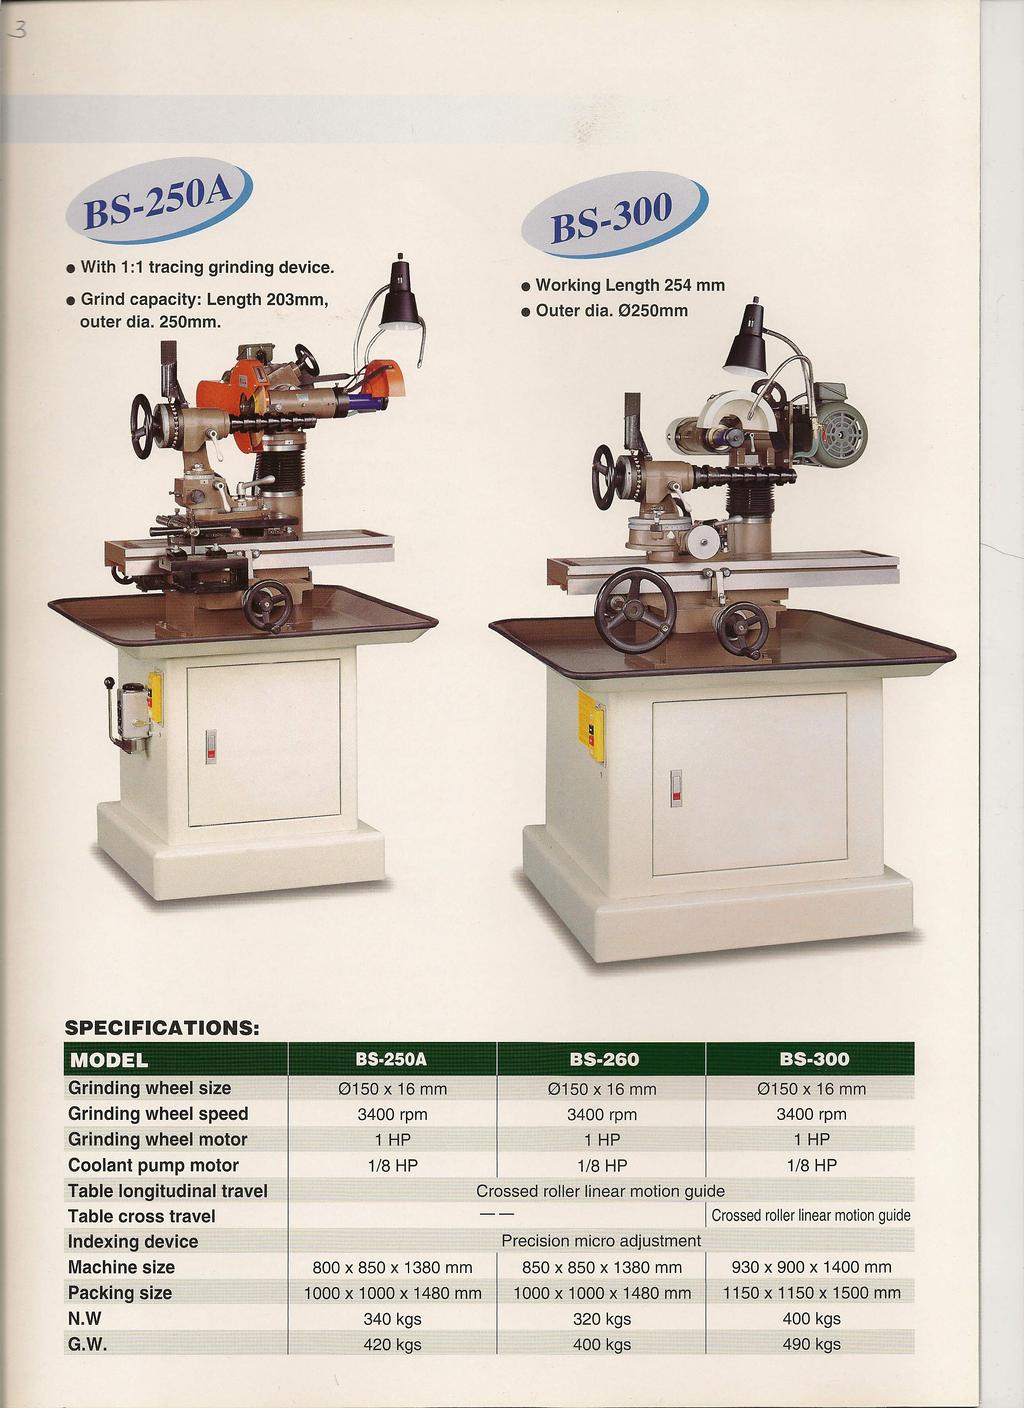 With 1:1 tracing grinding device. Working Length 254 Grind capacity: Length 203, outer dia. 250. Outer dia.